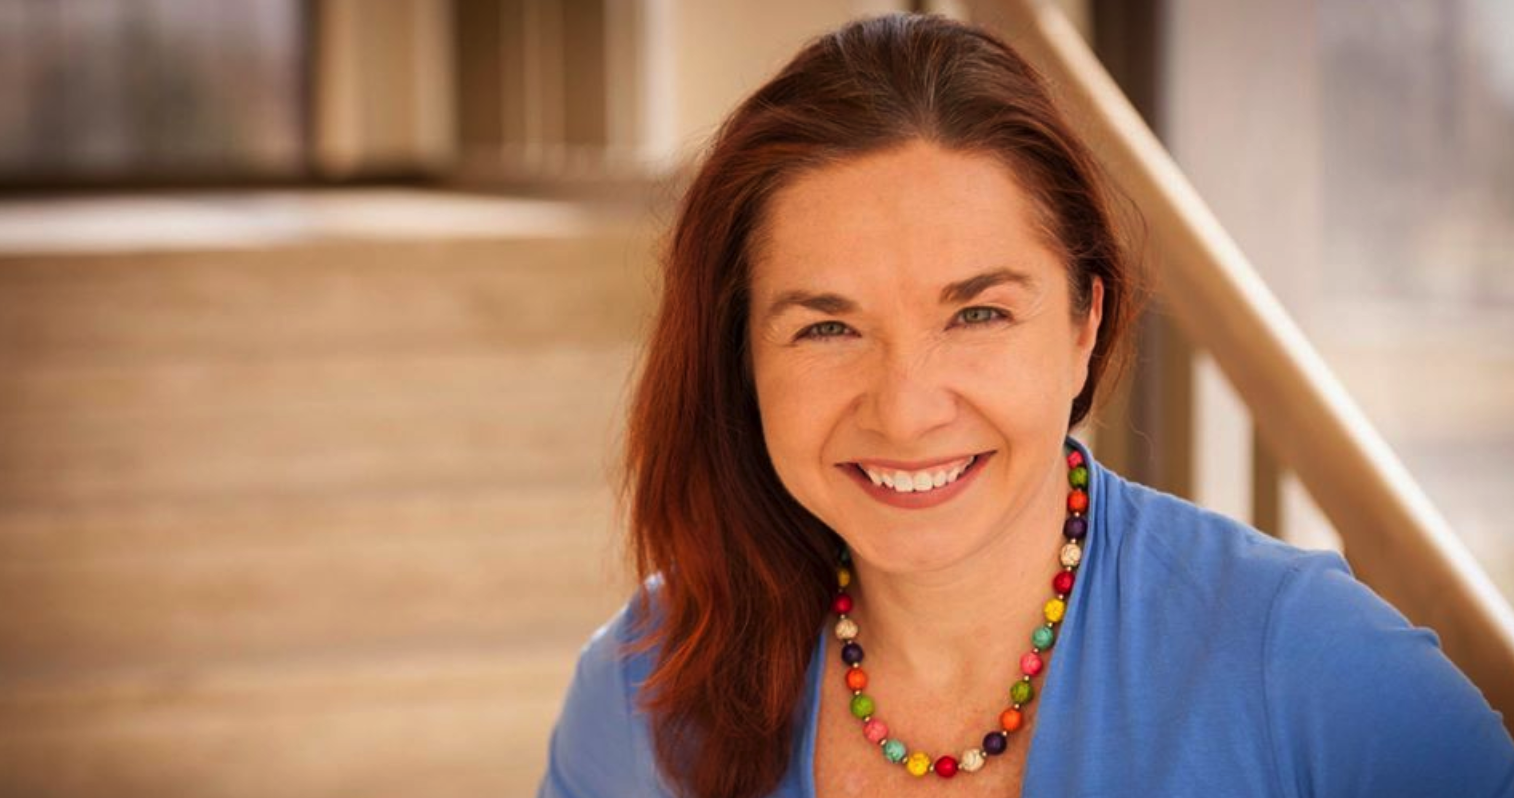 Uniting from Home: A virtual CCL event with Dr. Katharine Hayhoe 3108